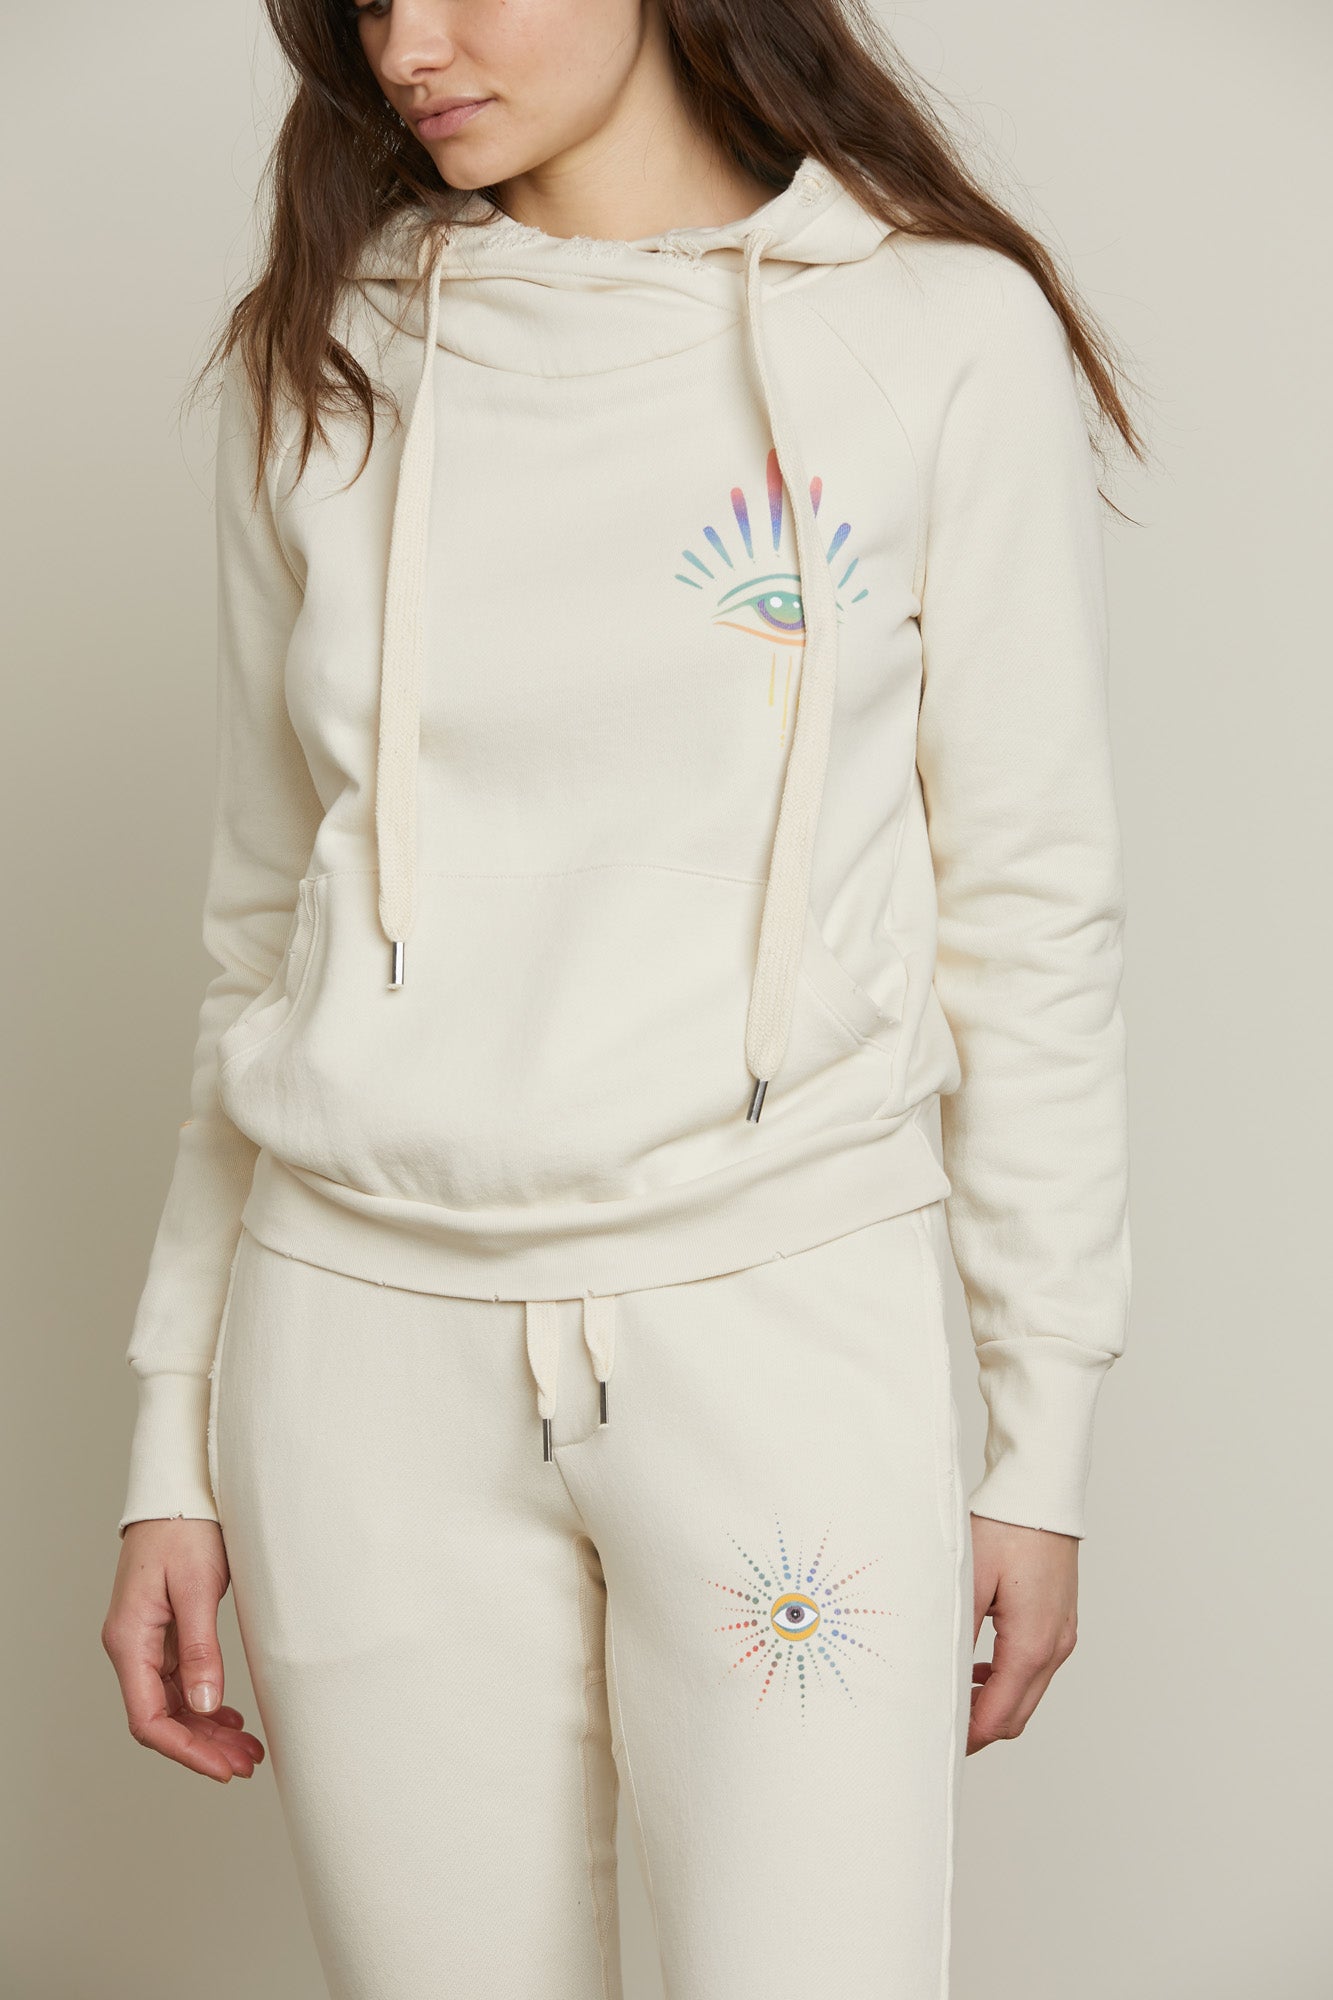 NSF x Jacquie Aiche Lisse Hoodie, Eye Candy, View 6 front detail 